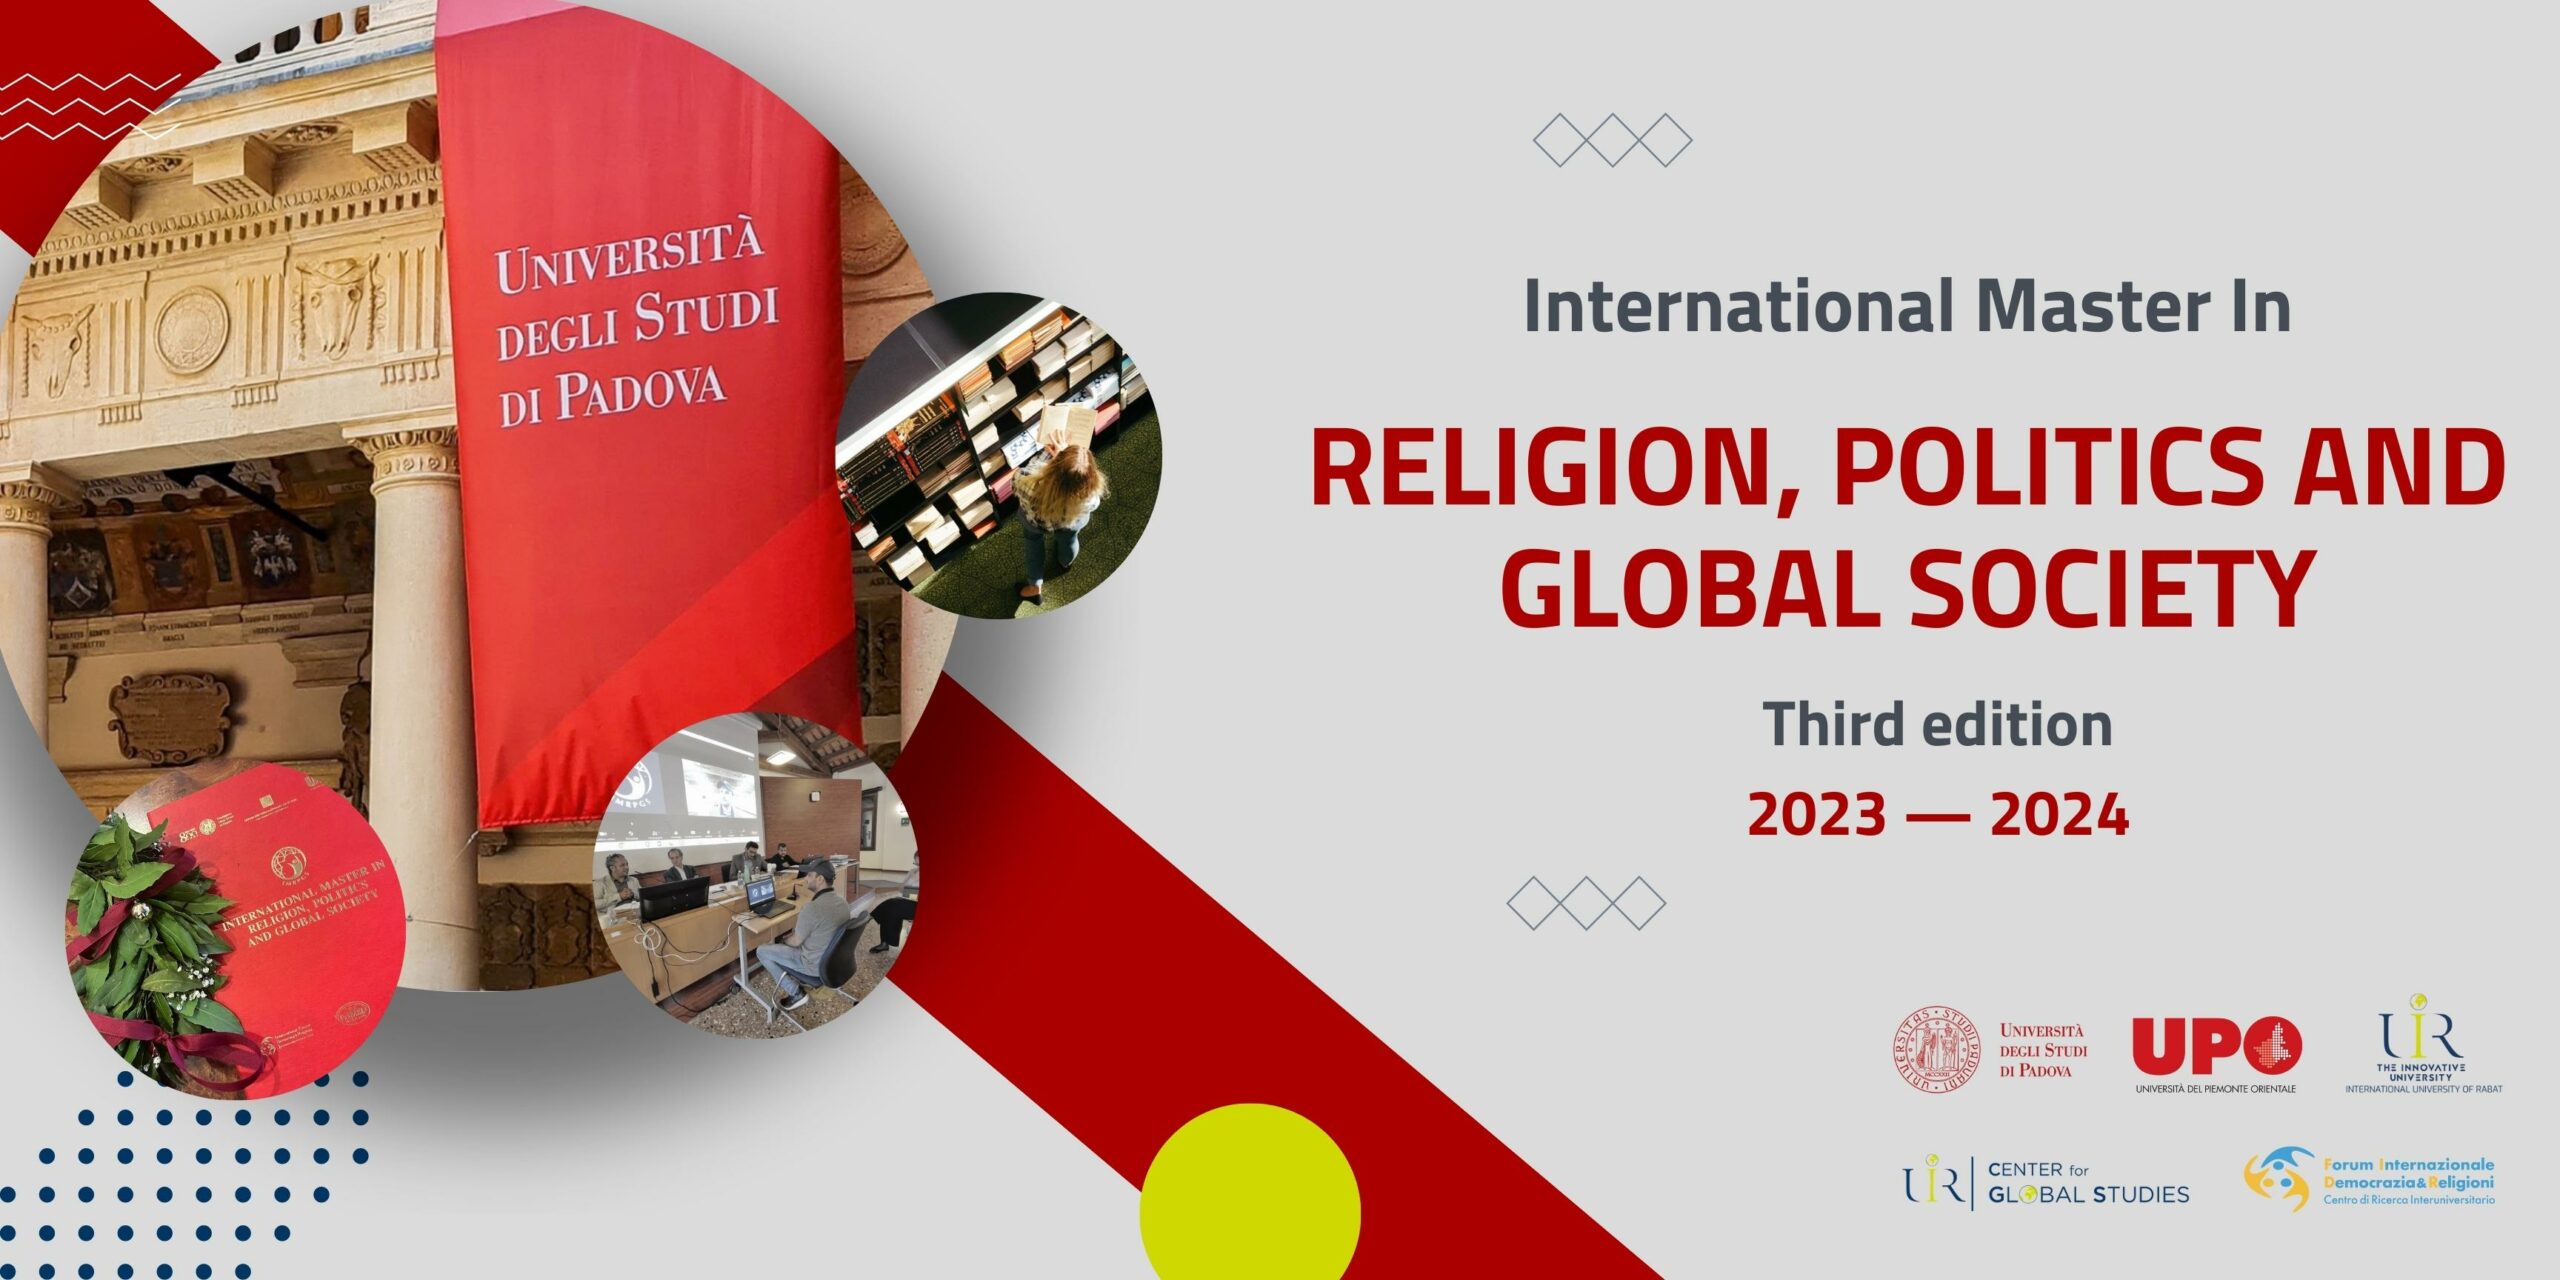 INTERNATIONAL MASTER IN RELIGION,POLITICS AND GLOBAL SOCIETY  - THIRD EDITION